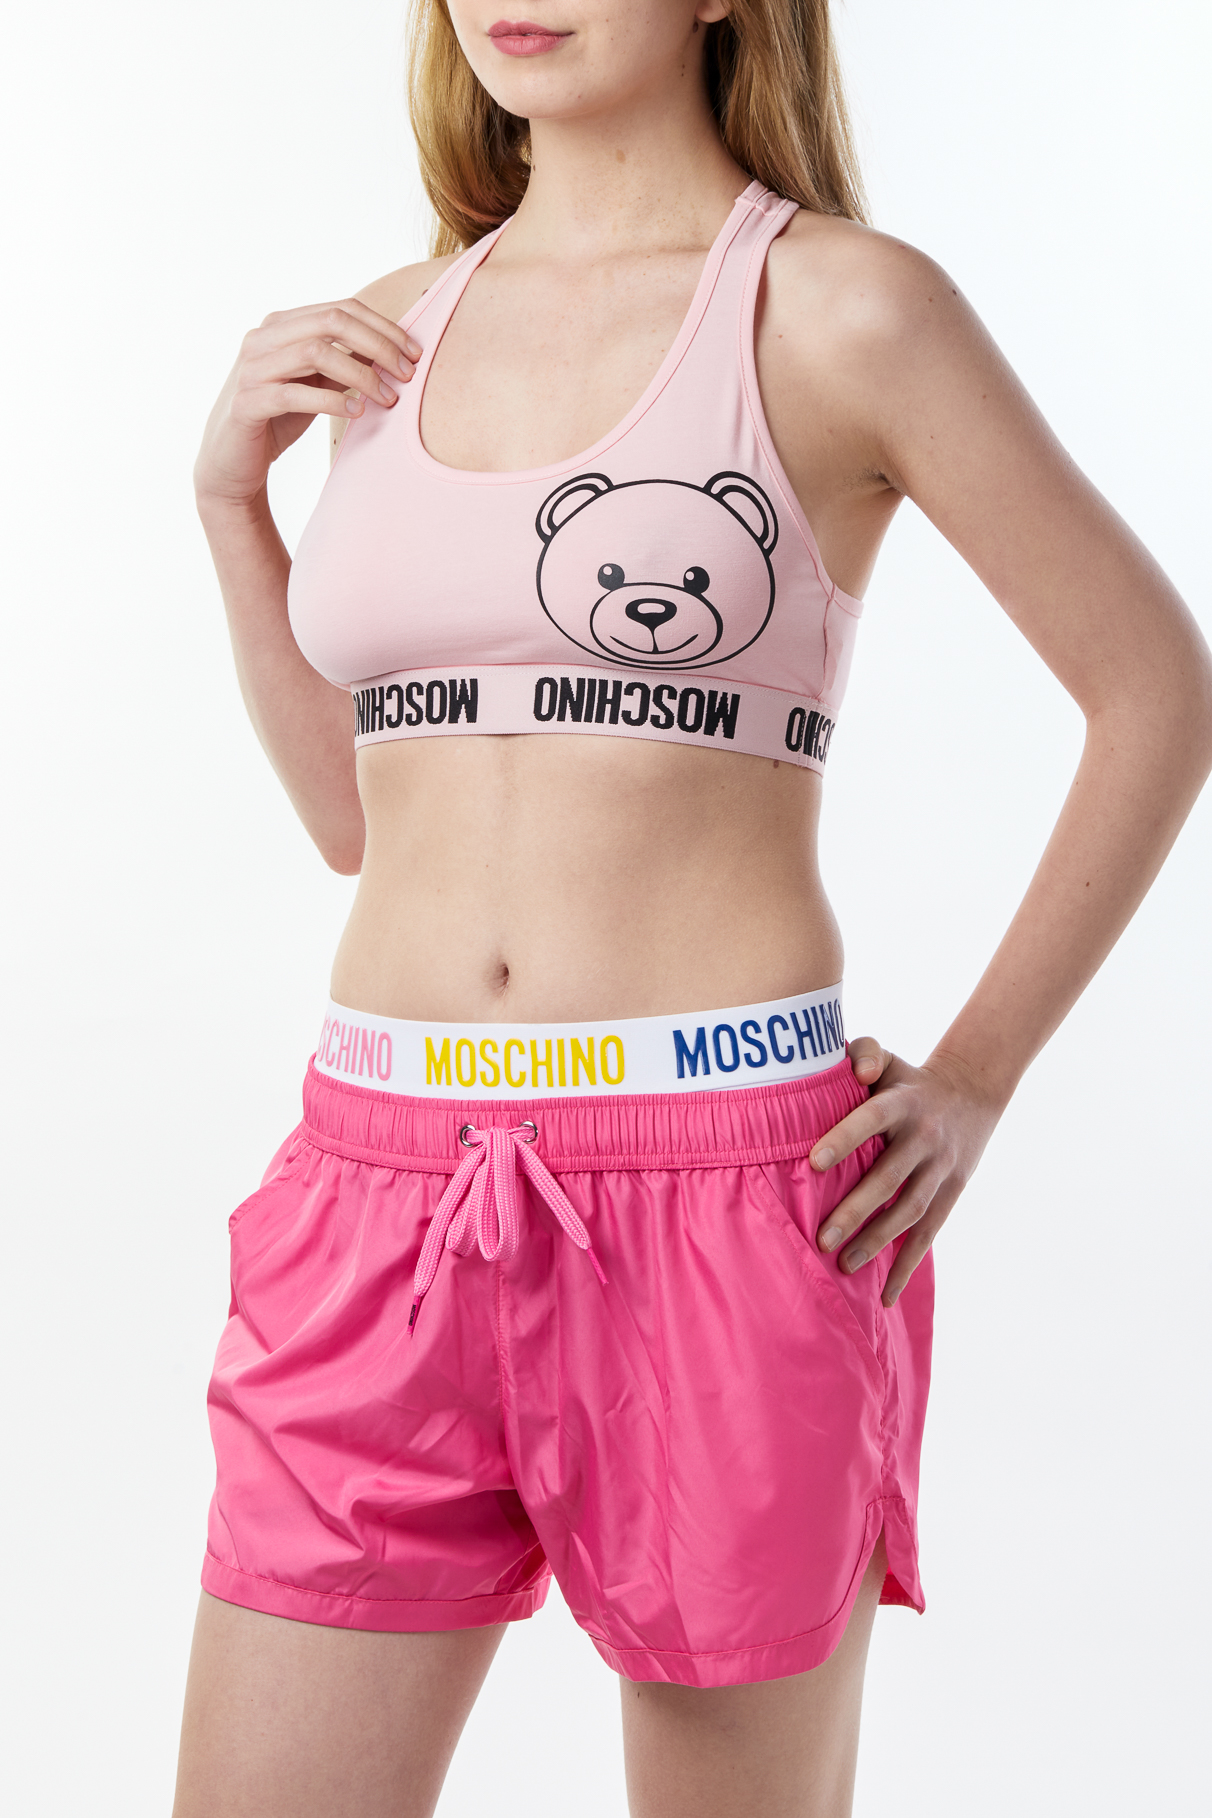 MOSCHINO TOP A6811 9008 227 DONNA